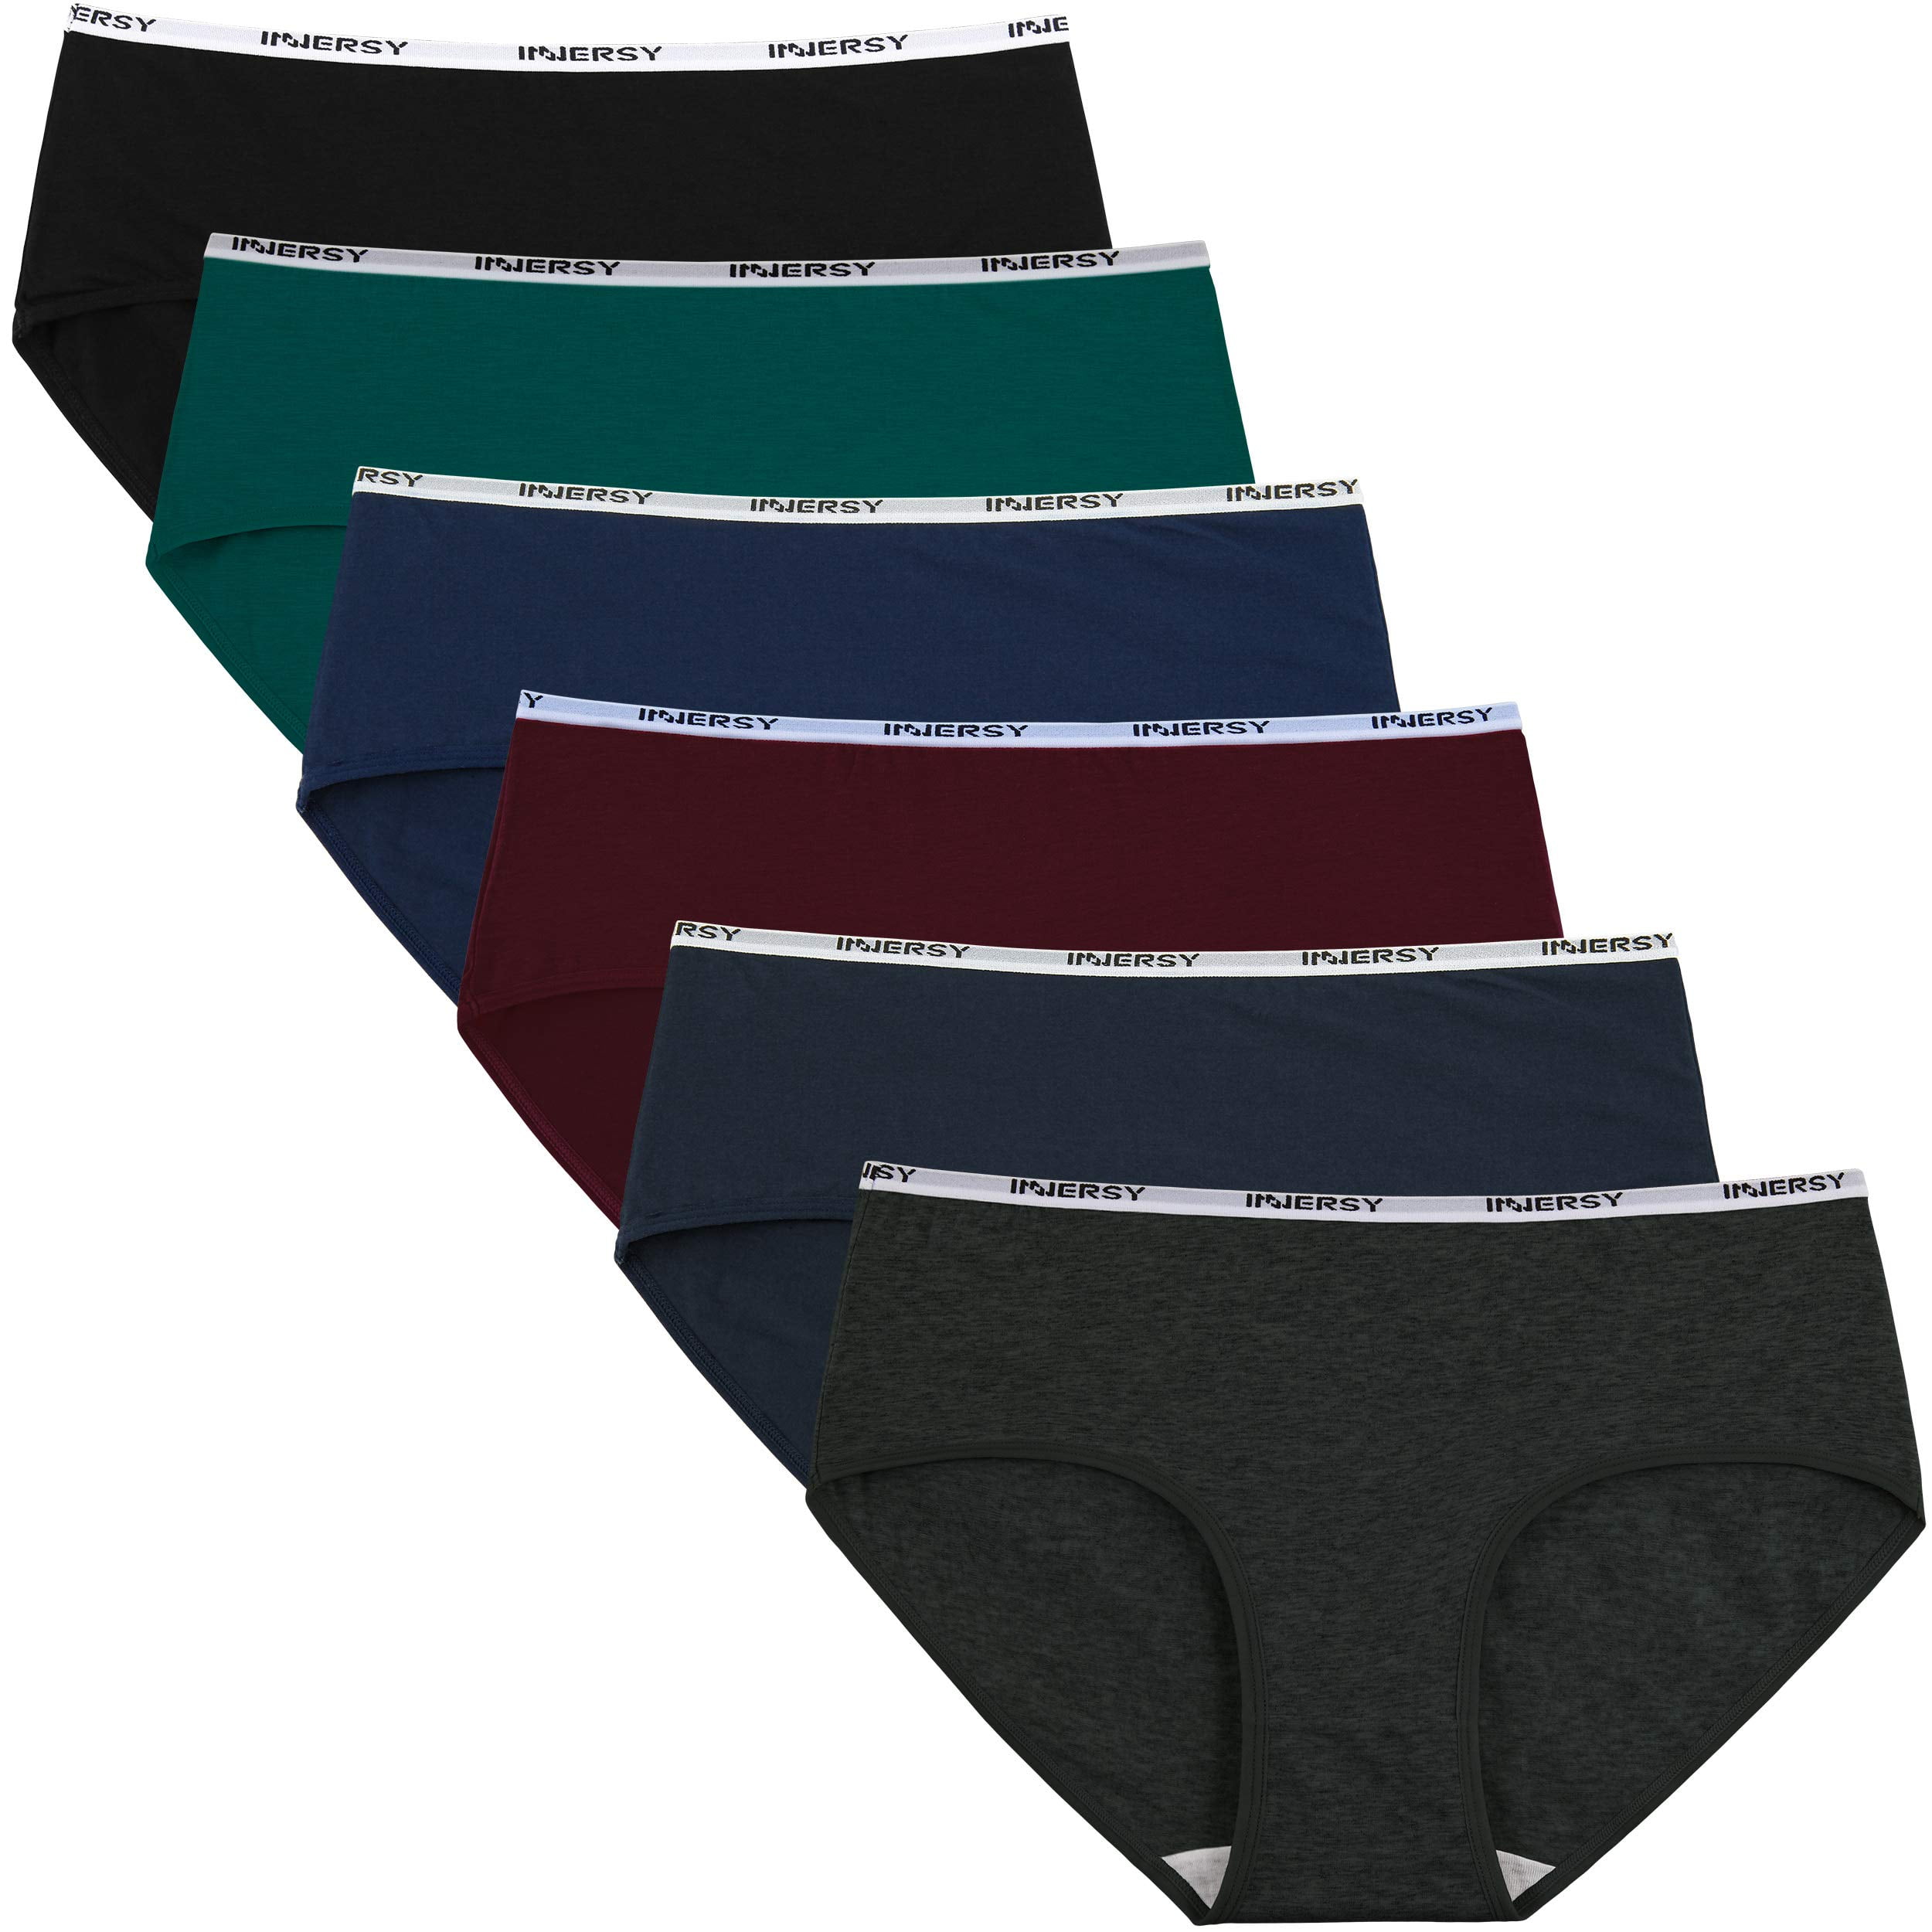 INNERSY Womens Underwear Cotton Hipster Panties Low Rise Basics Underwear  Pack of 6 (X-Large, Black) 